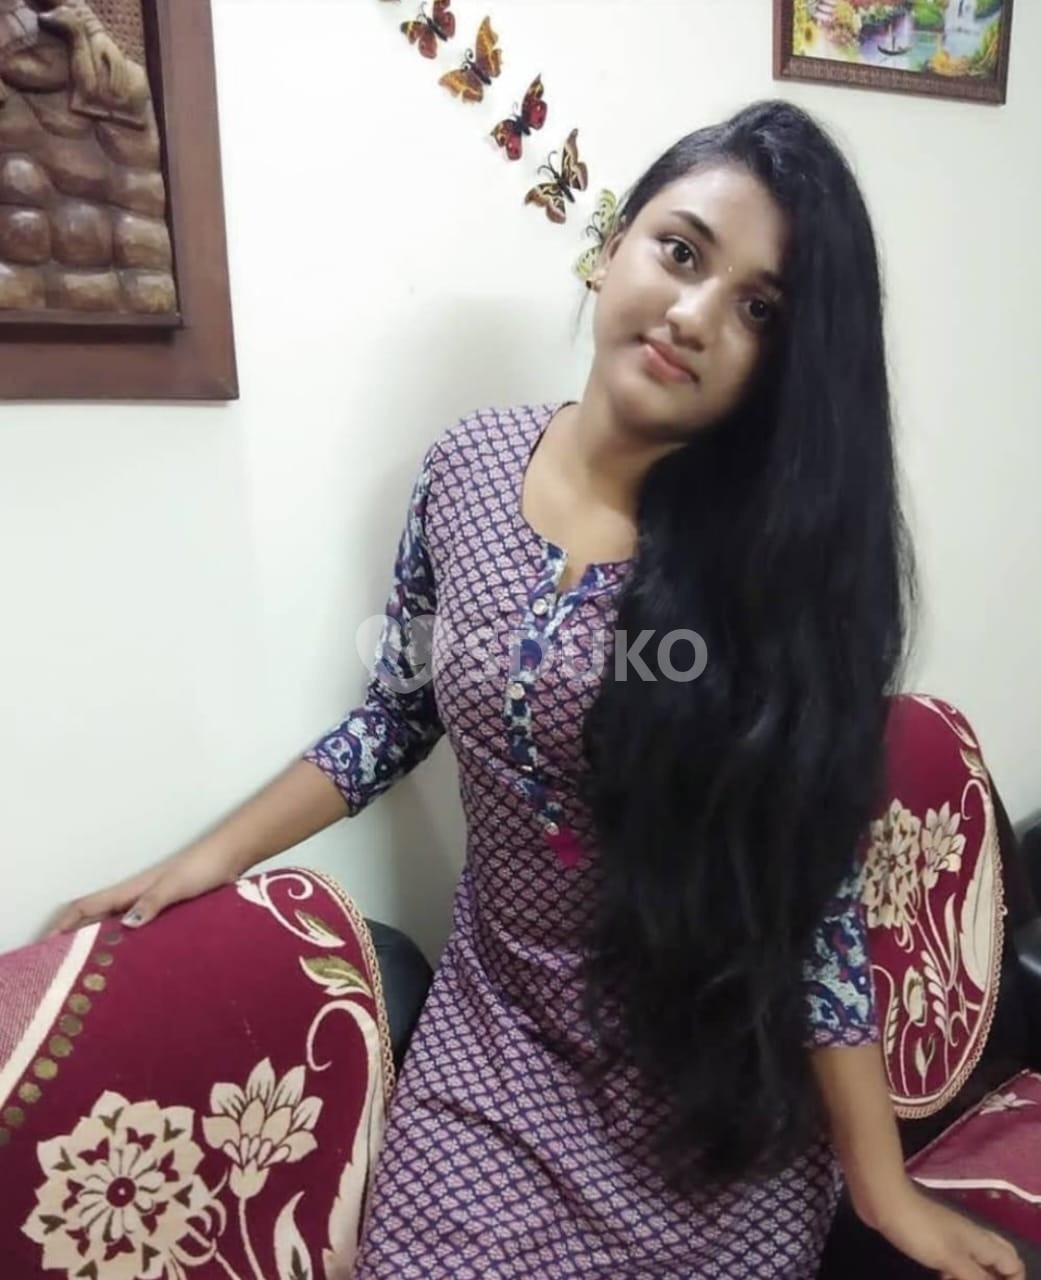 Tirupati*" MY SELF DIVYA UNLIMITED SEX CUTE BEST SERVICE AND SAFE AND SECURE AND 24 HR AVAILABLE